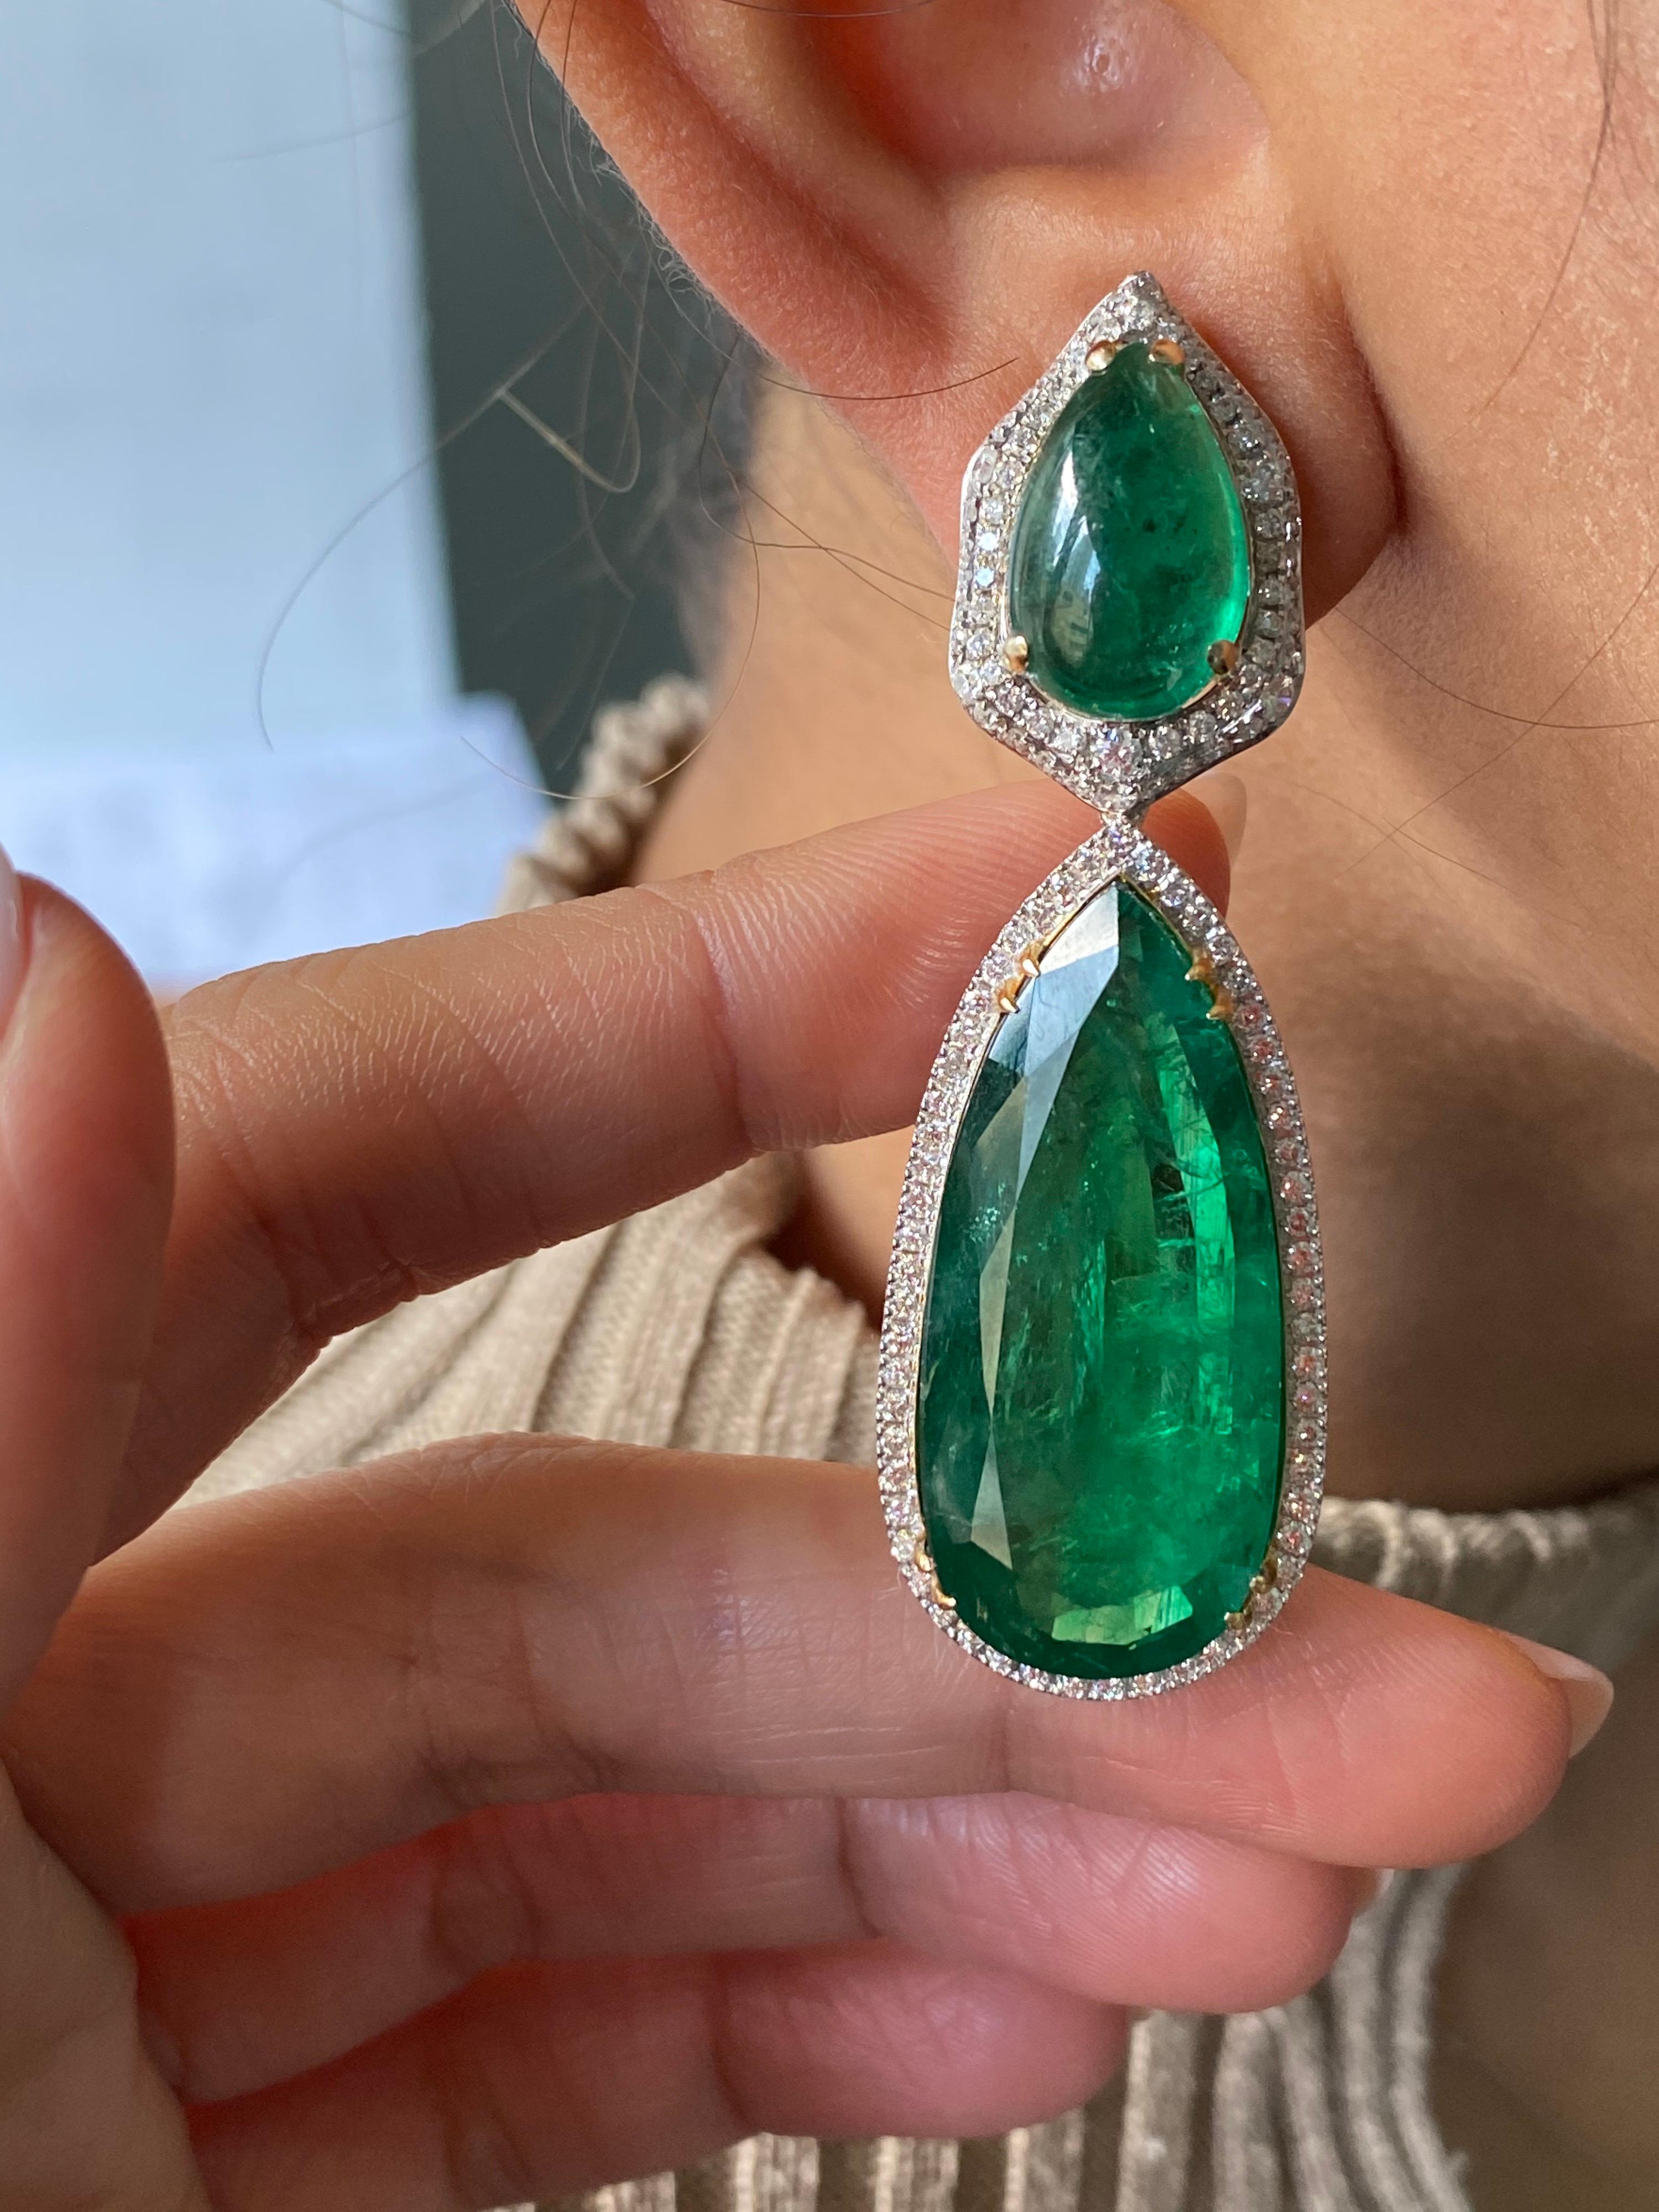 A pair of gorgeous 65.32 carats Zambian Emeralds and Diamond drop, dangle earrings, set in solid 18K White Gold. The top pear shape cabochon Emeralds weigh 10.88 carats in total, set with 2.91 carats of colorless VS quality White Diamonds. The